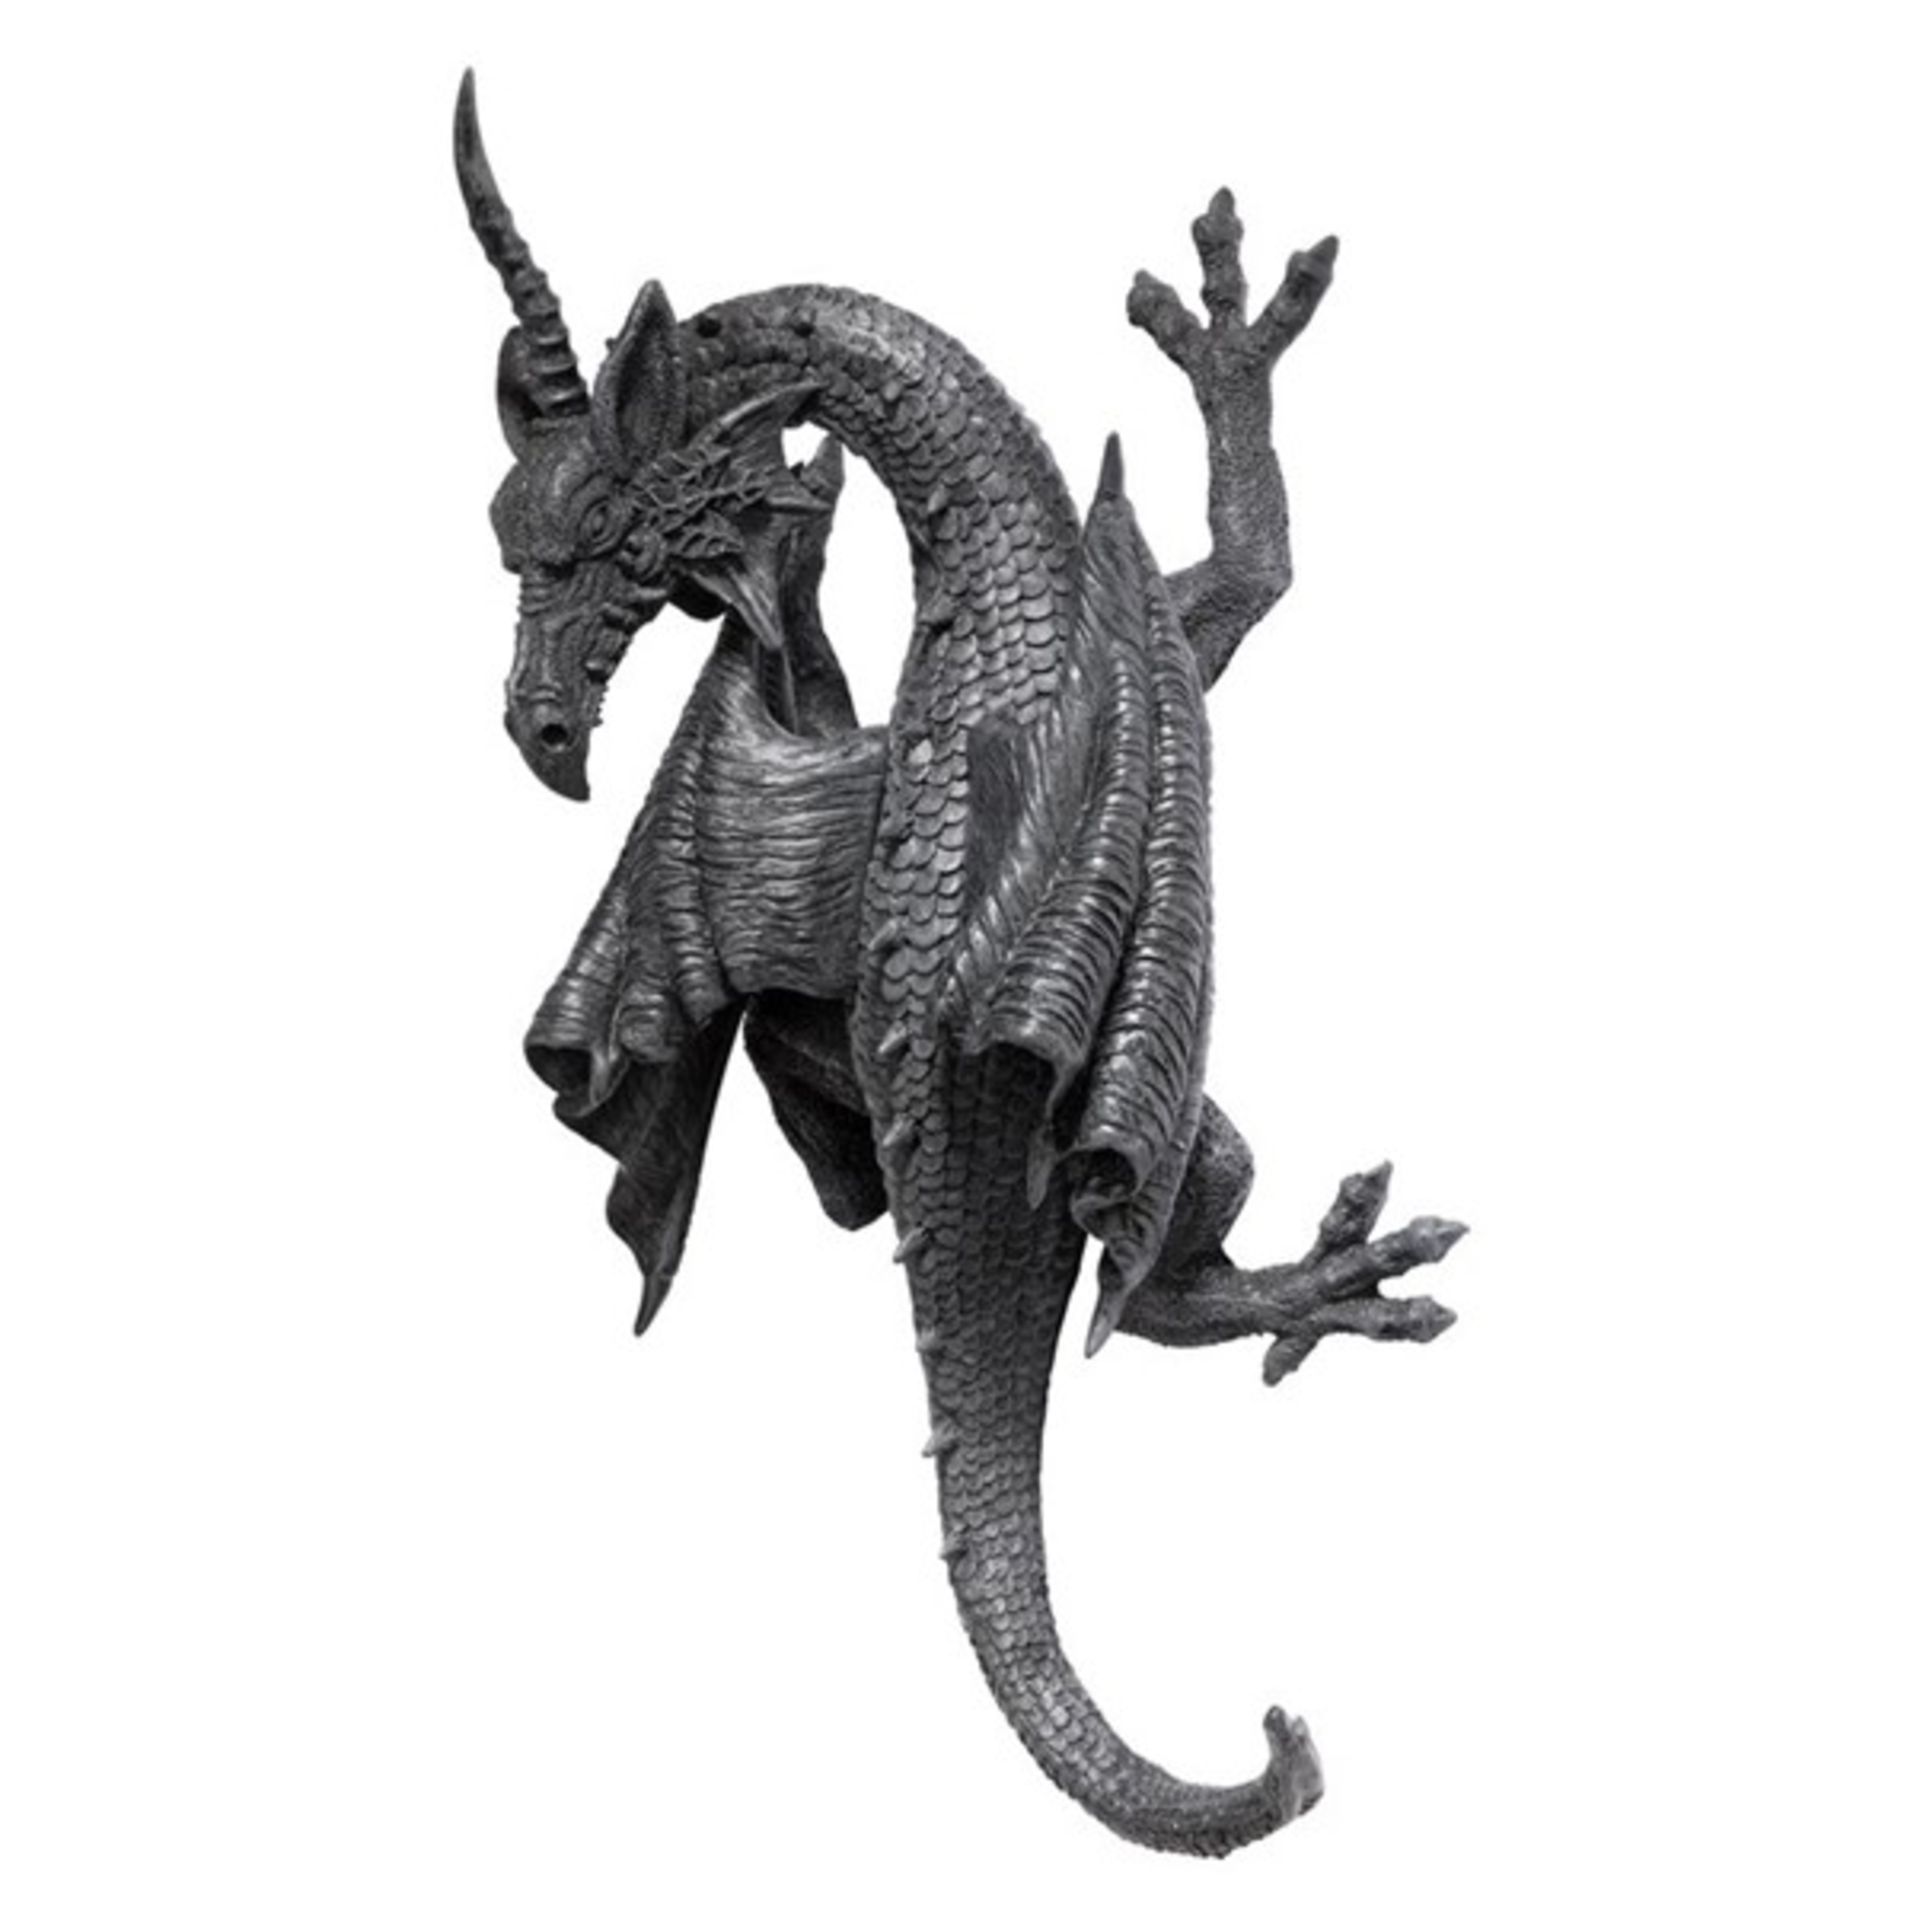 RRP £50.99 - Horned Dragon of Devonshire Wall Décor - 34.29cm H x 17.78cm W - Image 2 of 3